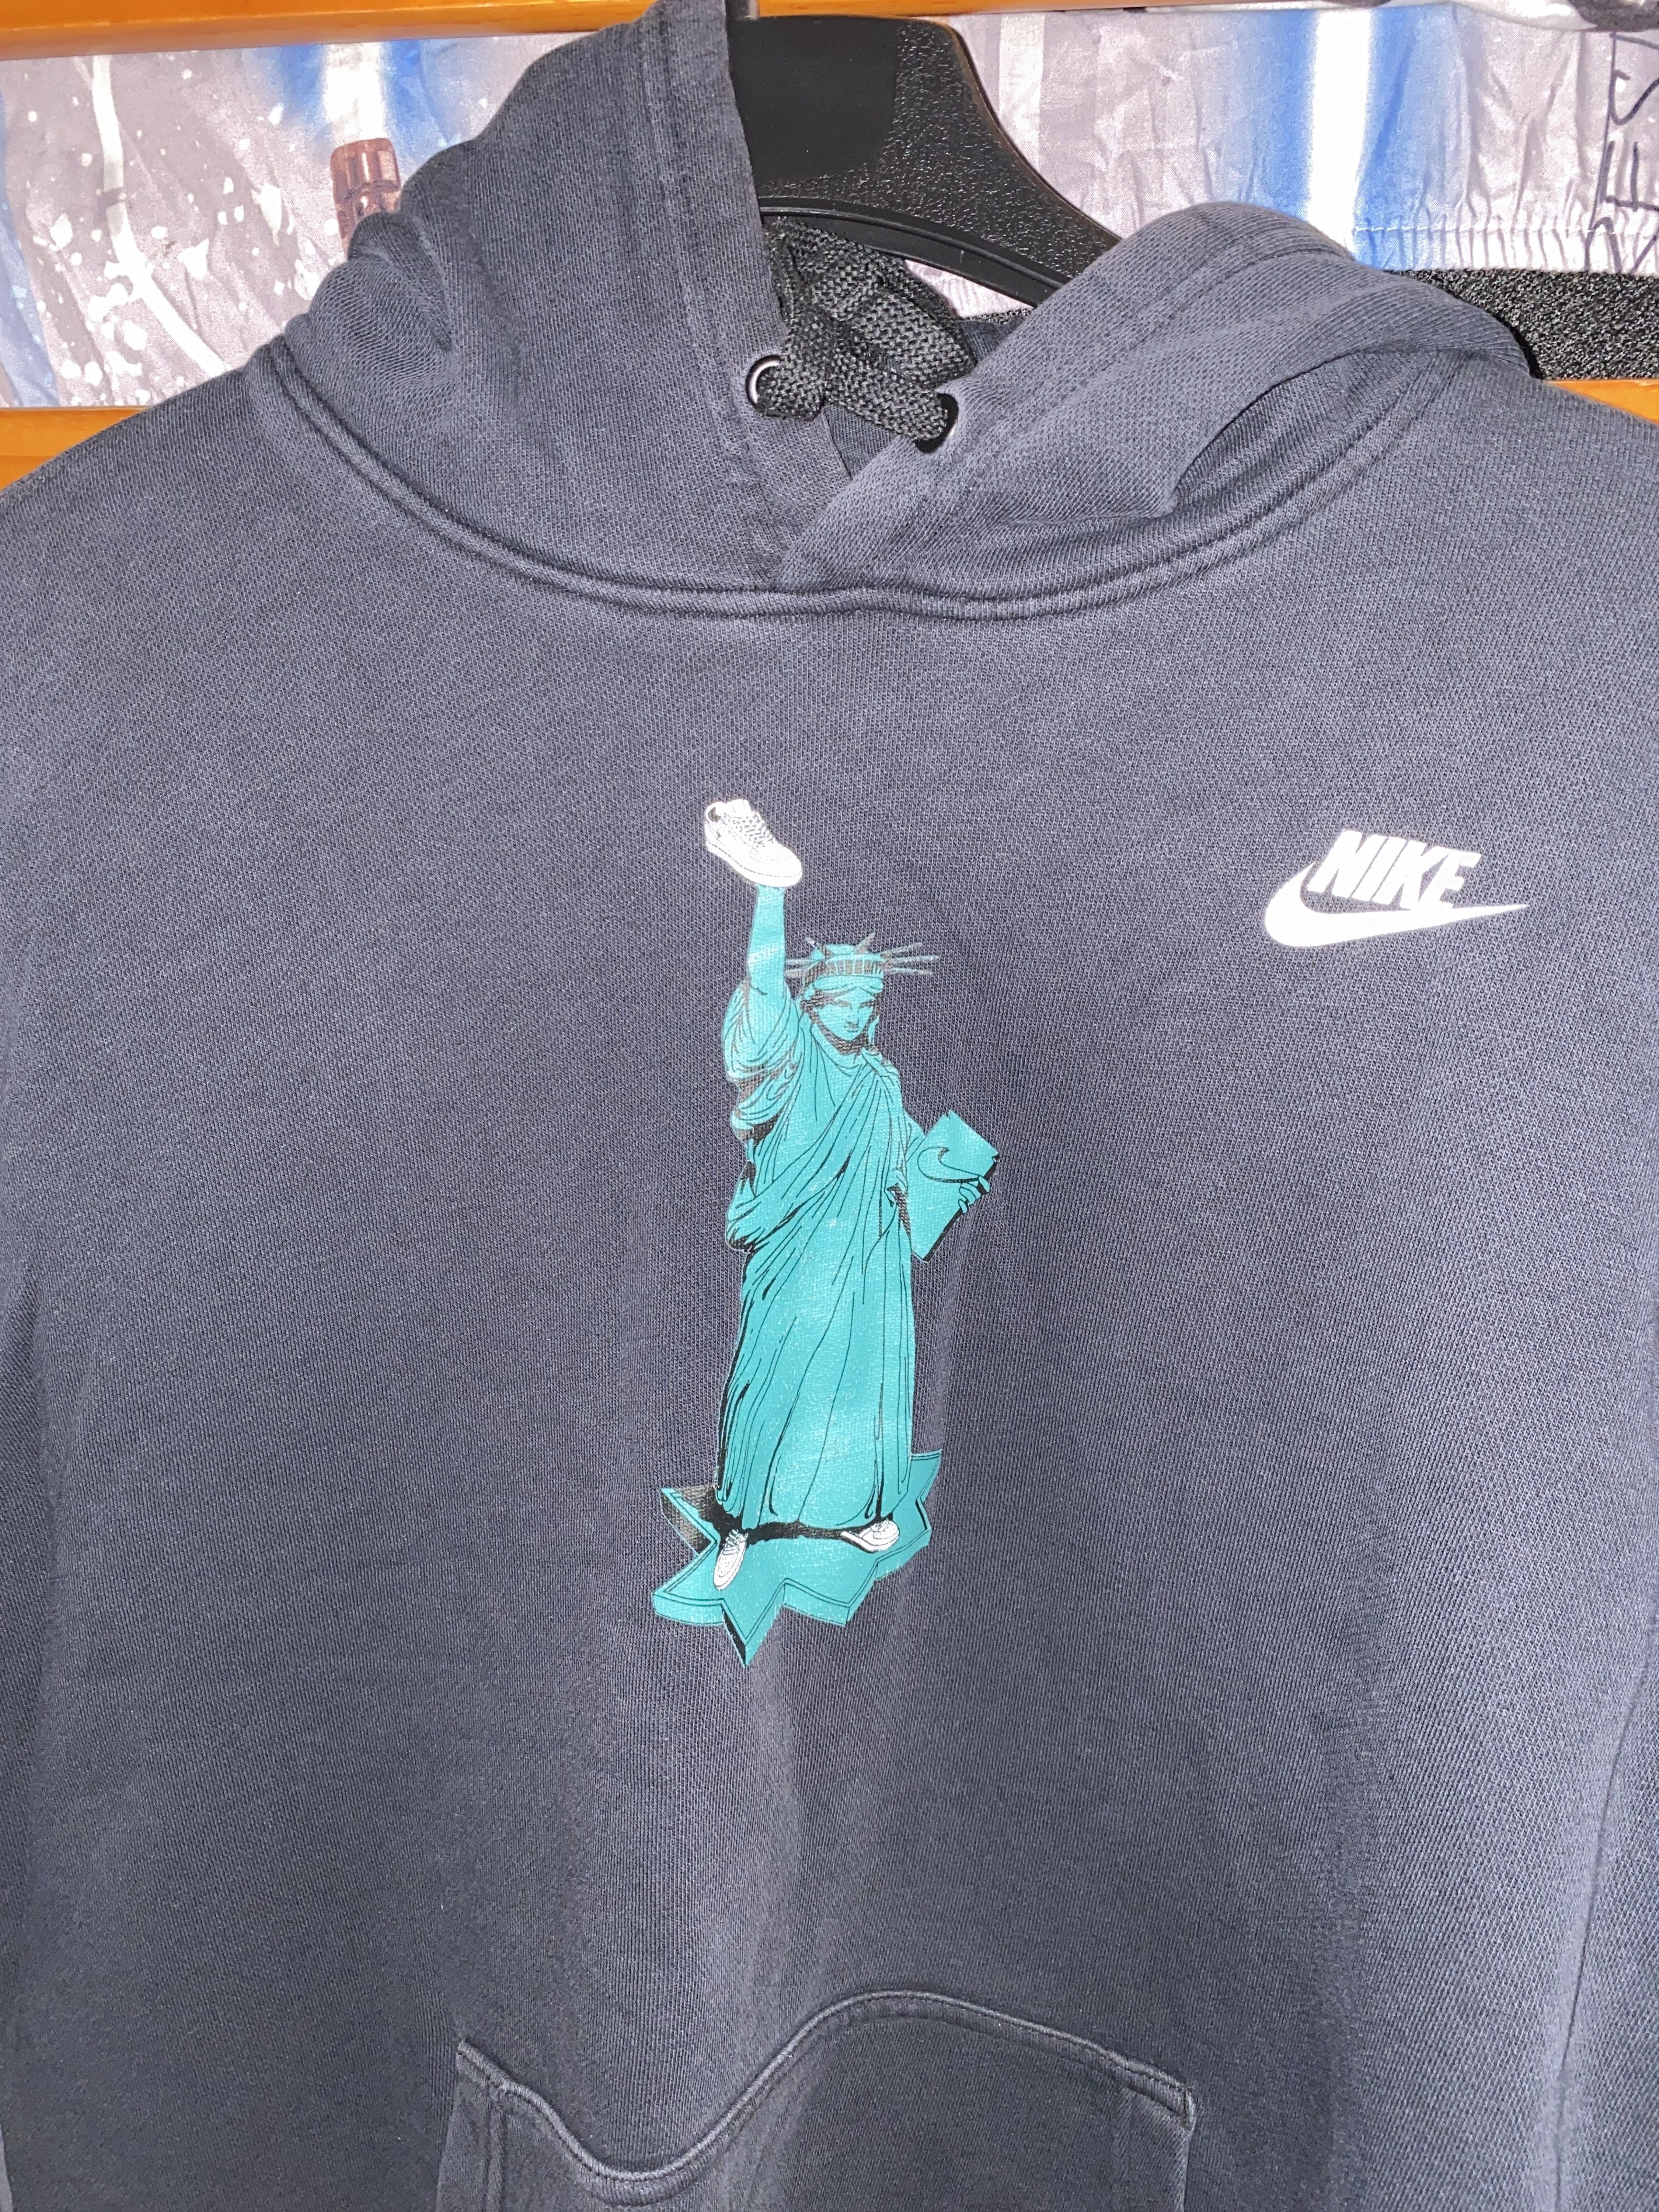 Nike DSM 5th Anniversary Statue of Liberty Hoodie DS | Grailed